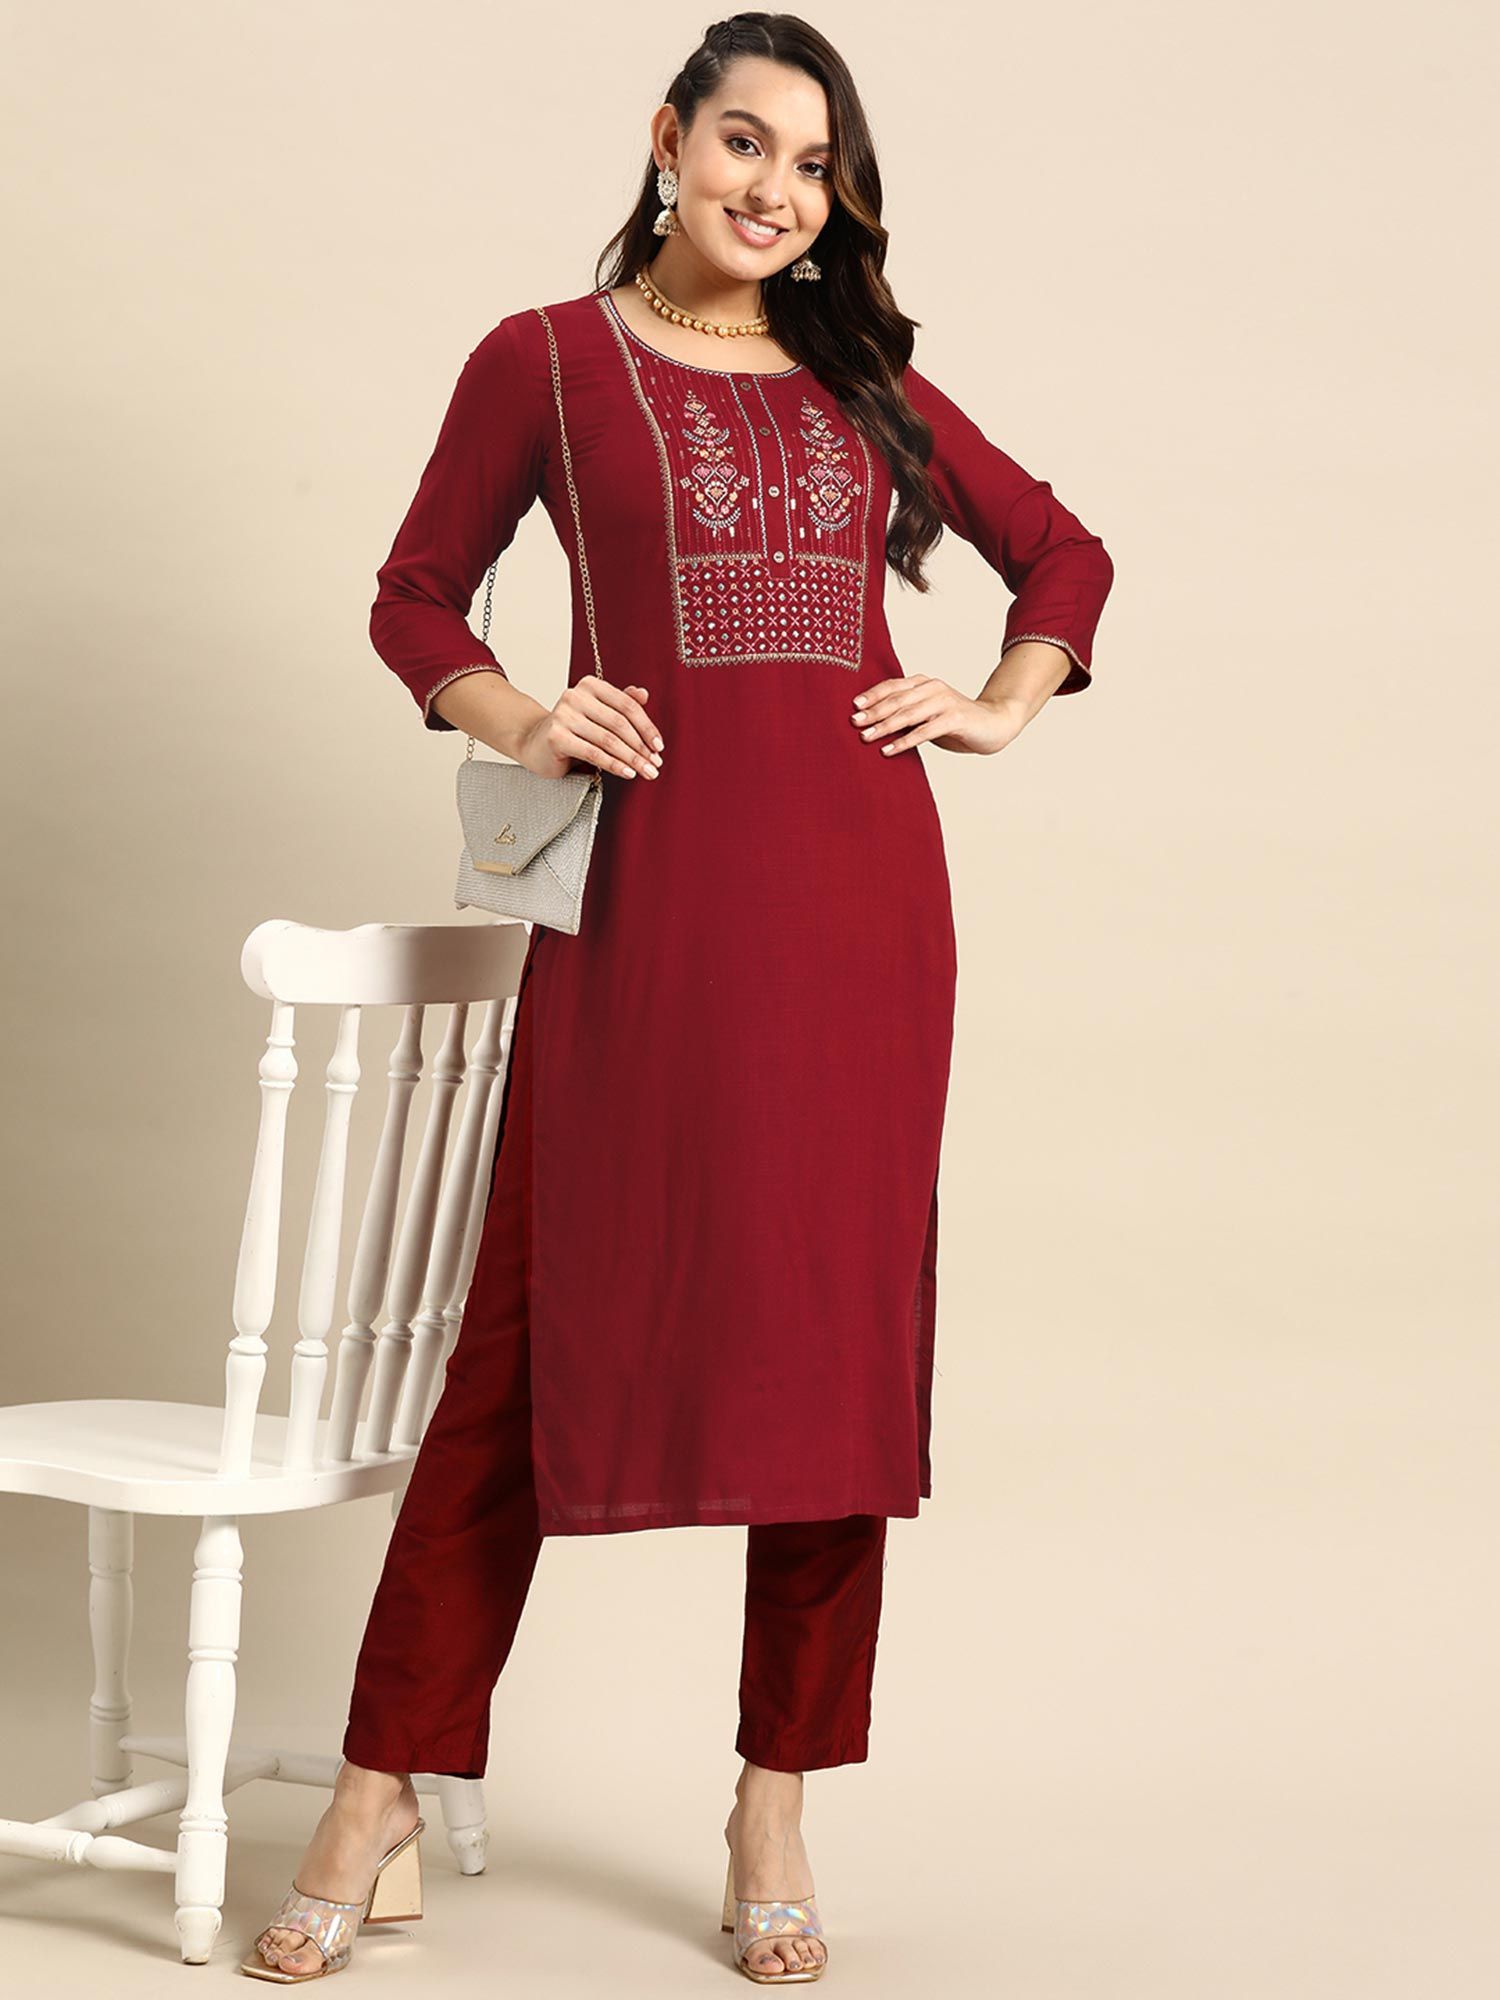 A-Line Stitched Women'S Maroon Silk Kurti Pant Set, Dry Clean Only at Rs  3660/set in Noida